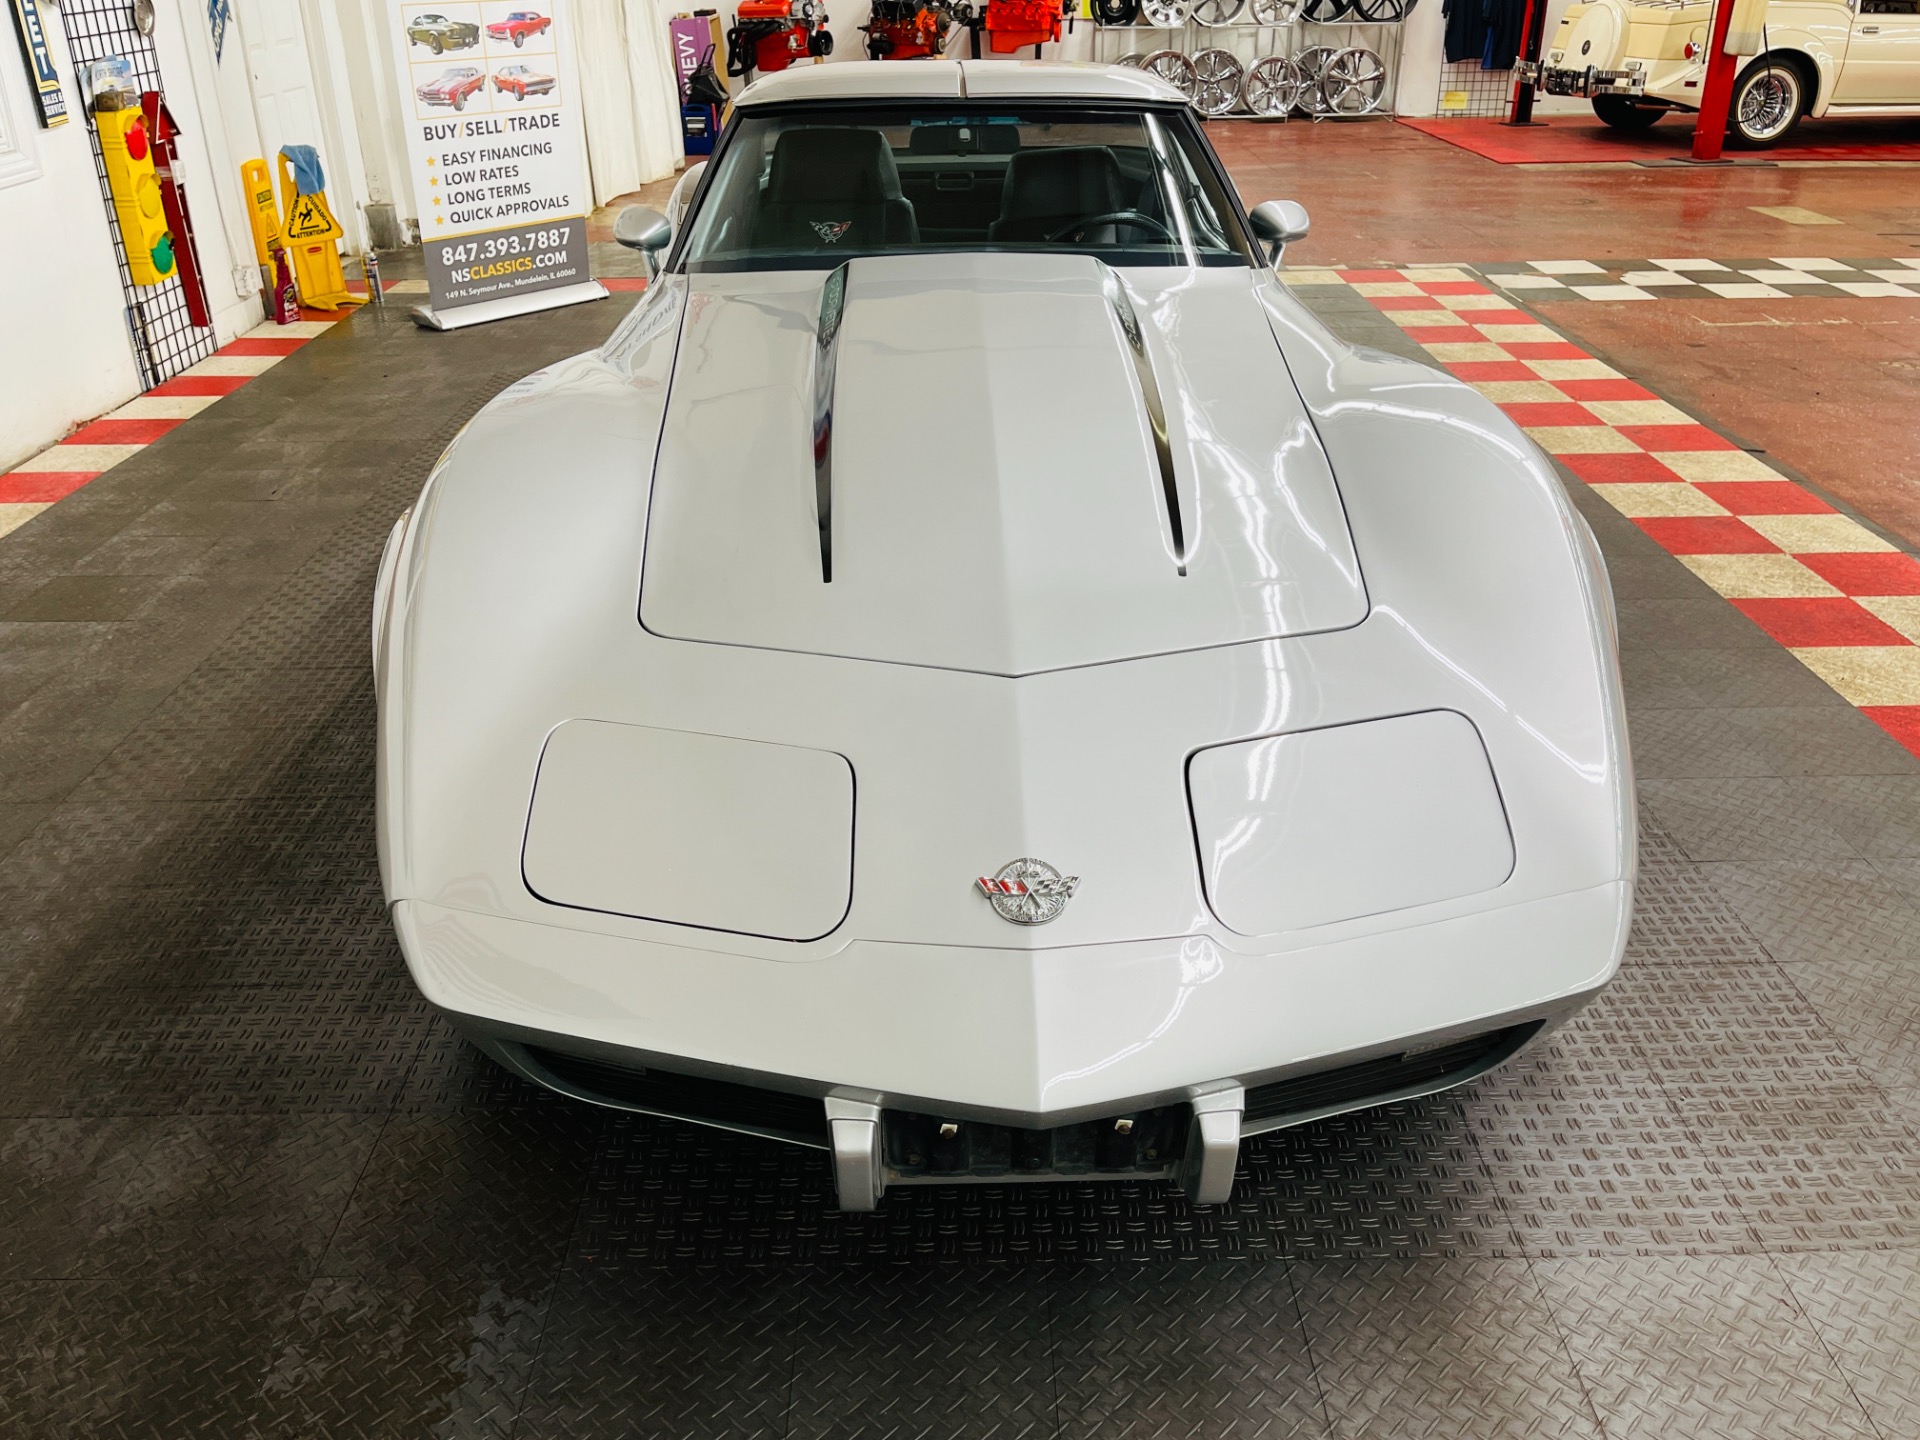 Used 1978 Chevrolet Corvette - 25TH ANNIVERSARY - LOTS OF UPGRADES - SEE VIDEO | Mundelein, IL